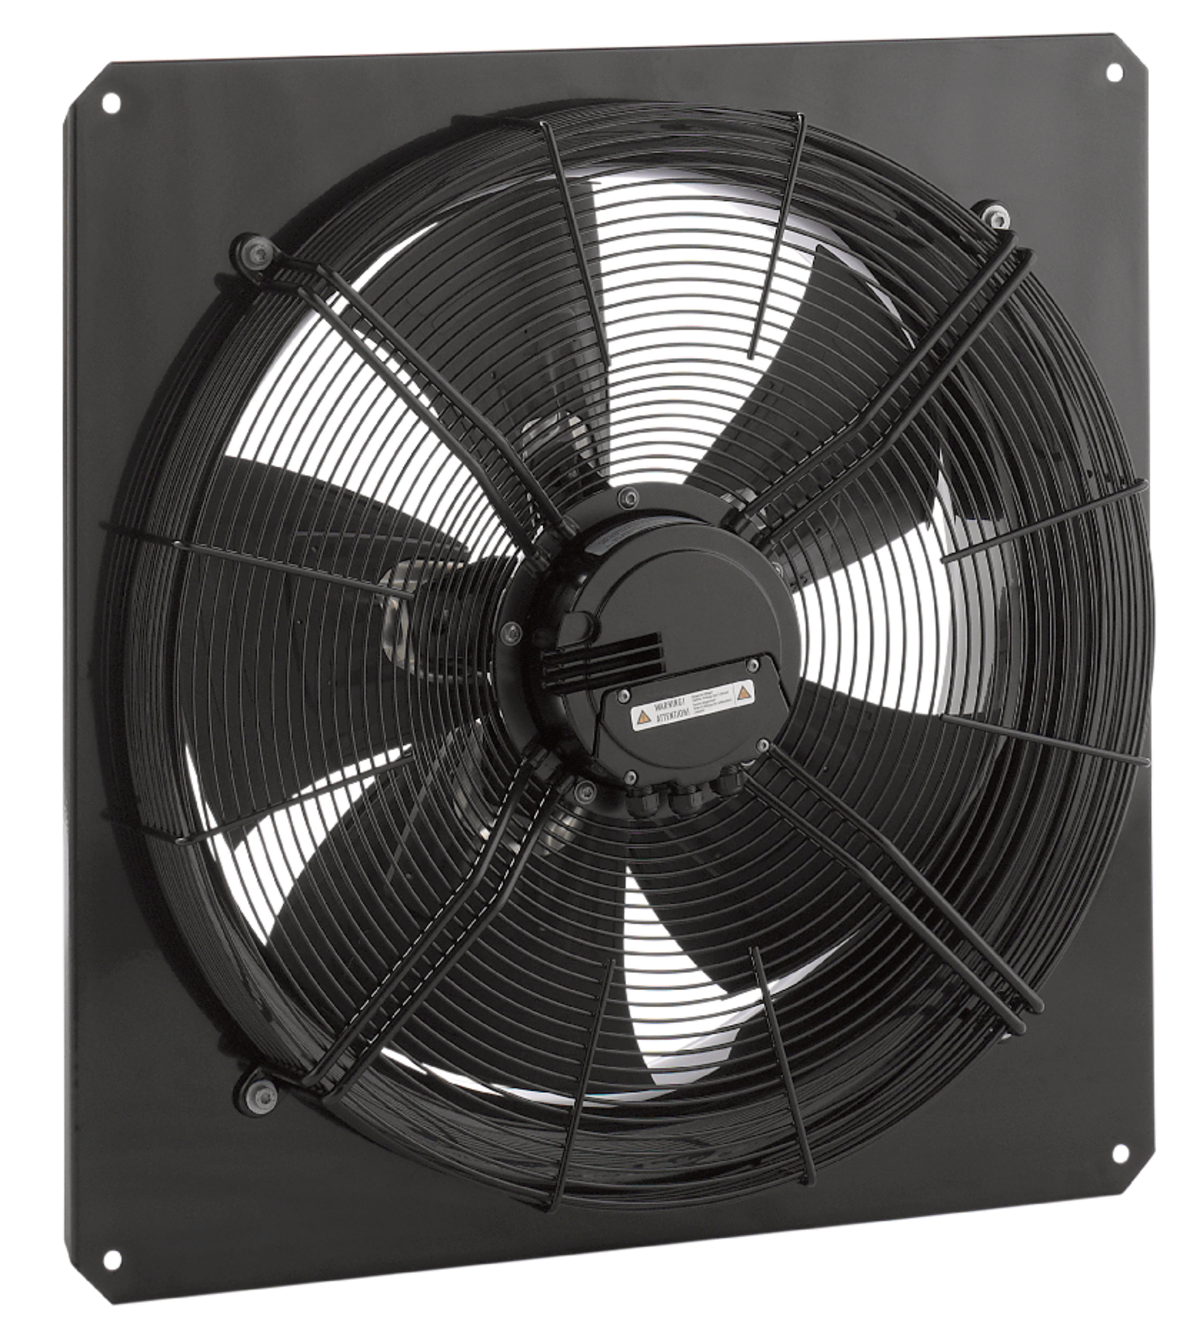 AW - Axial Fans - Fans - Products - Systemair